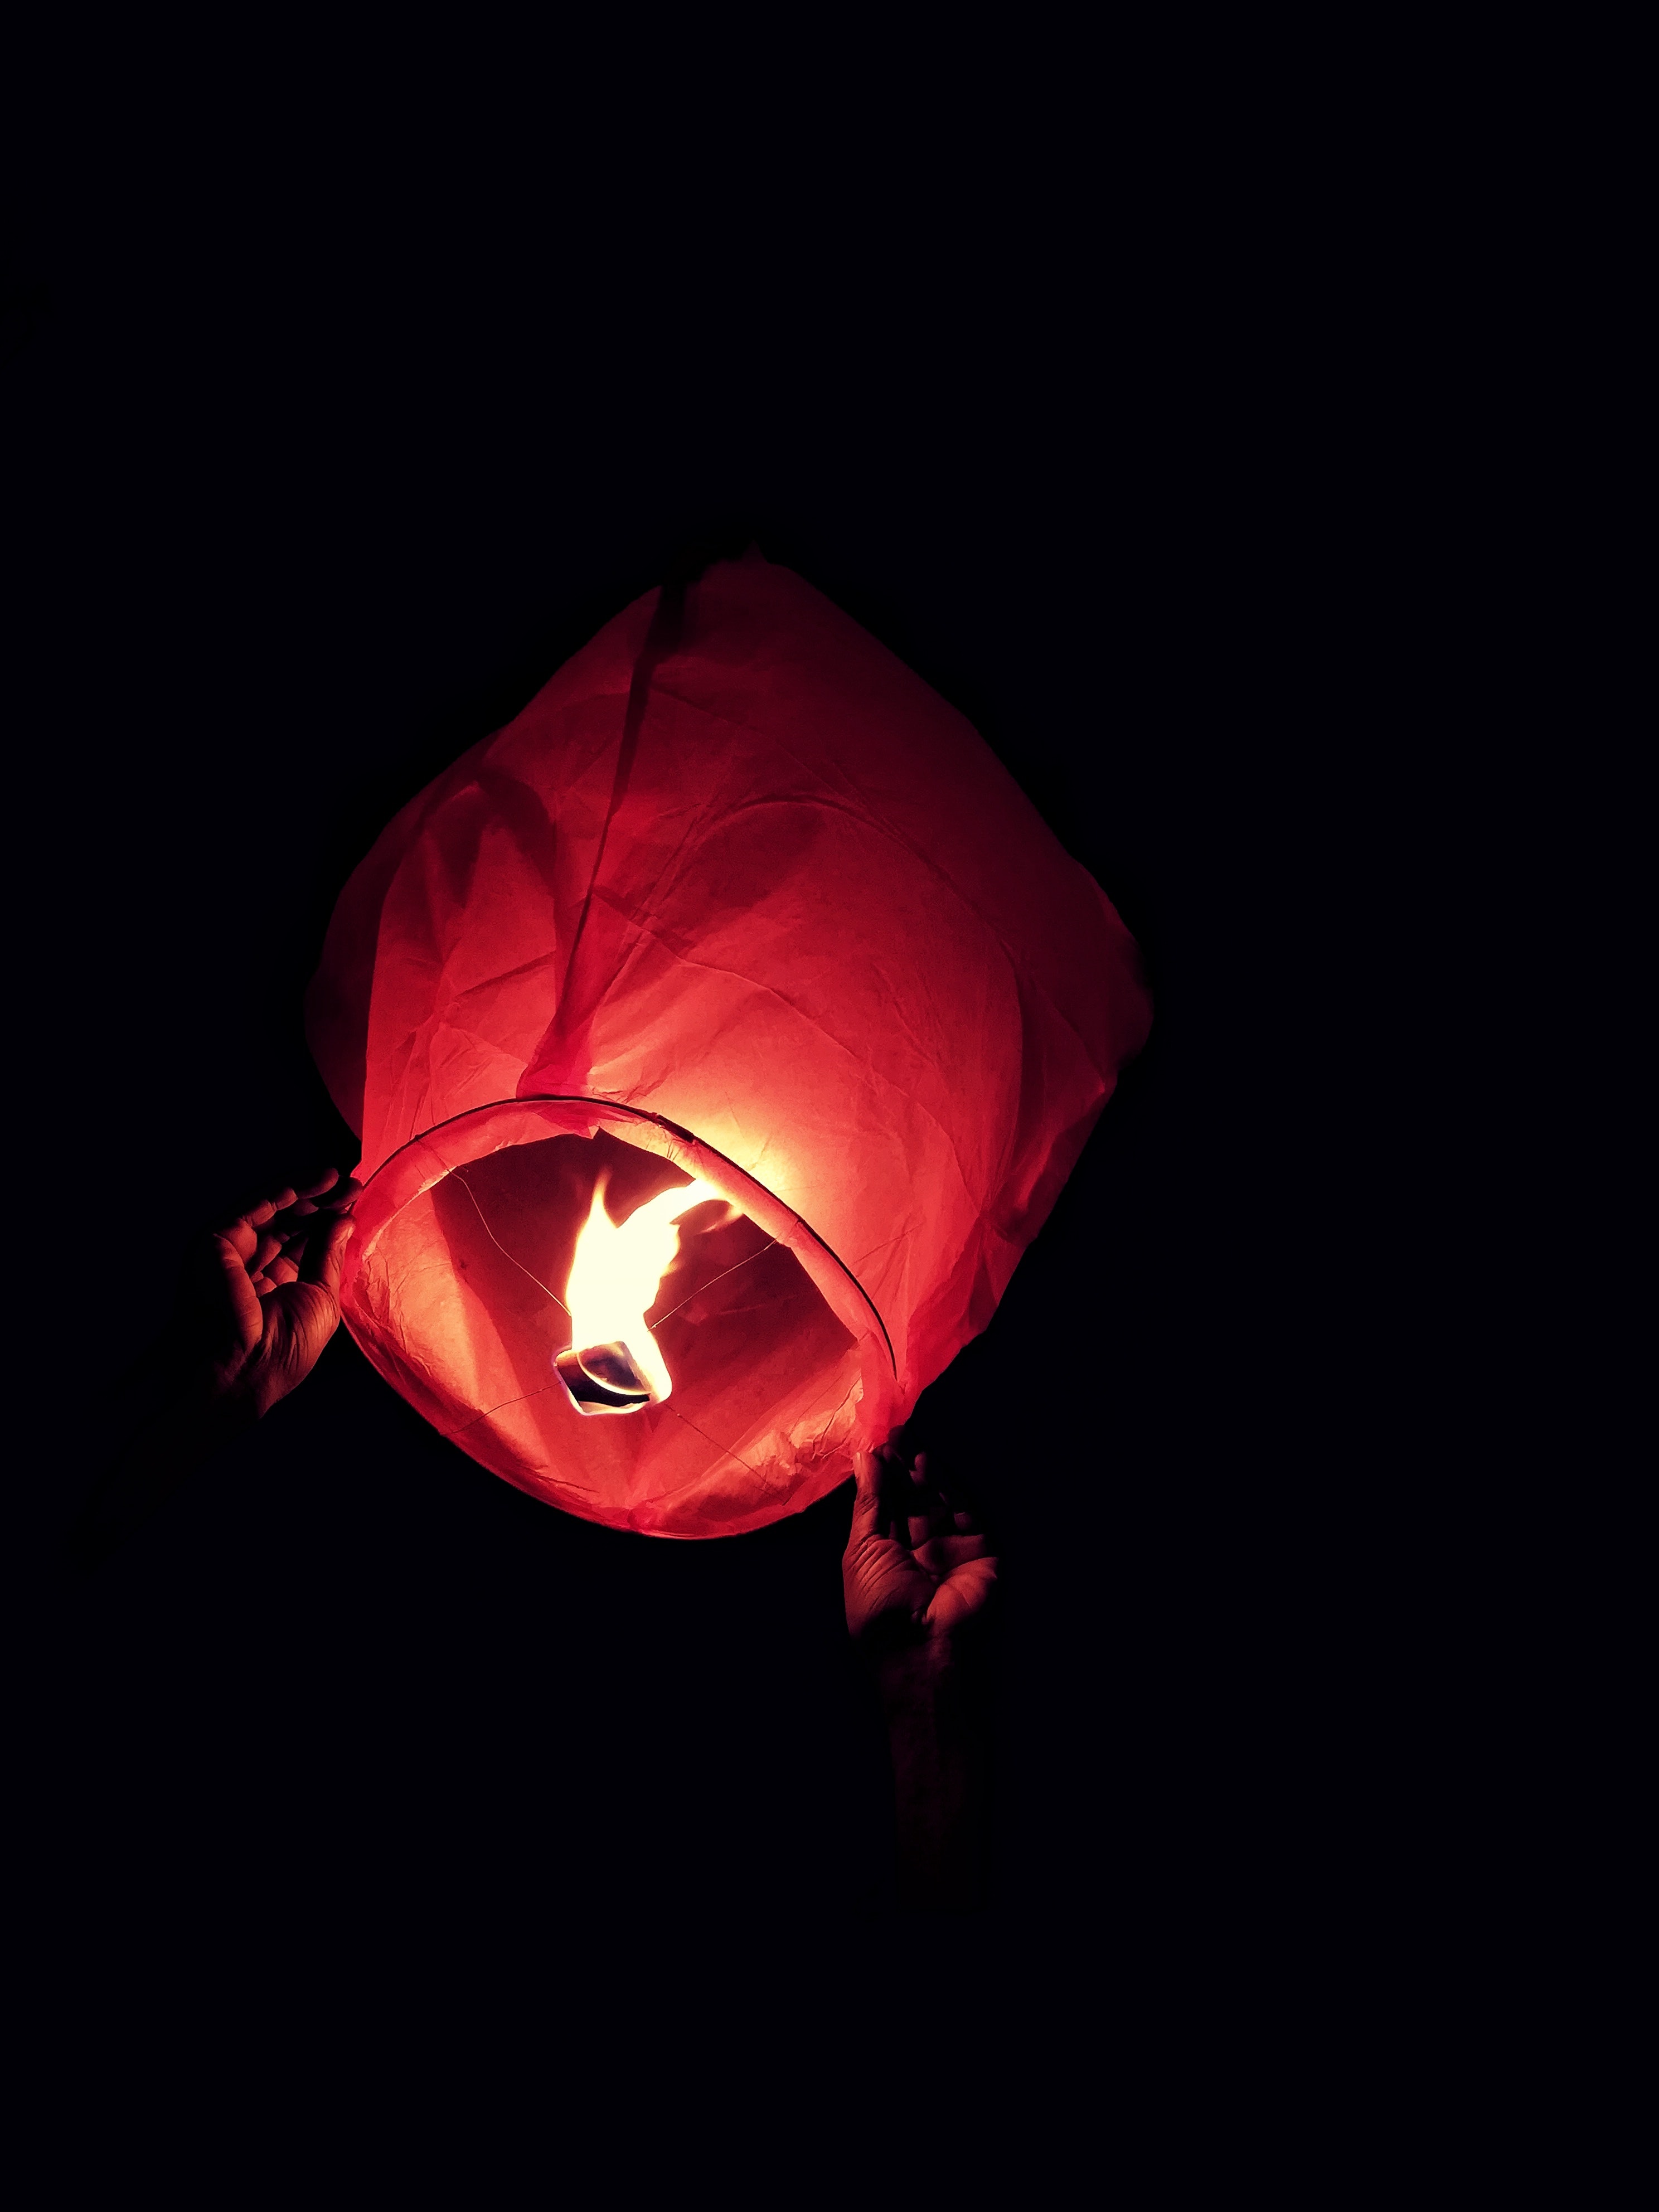 Red Sky Lantern With Fire, Art, Candle, Close-up, Dark, HQ Photo